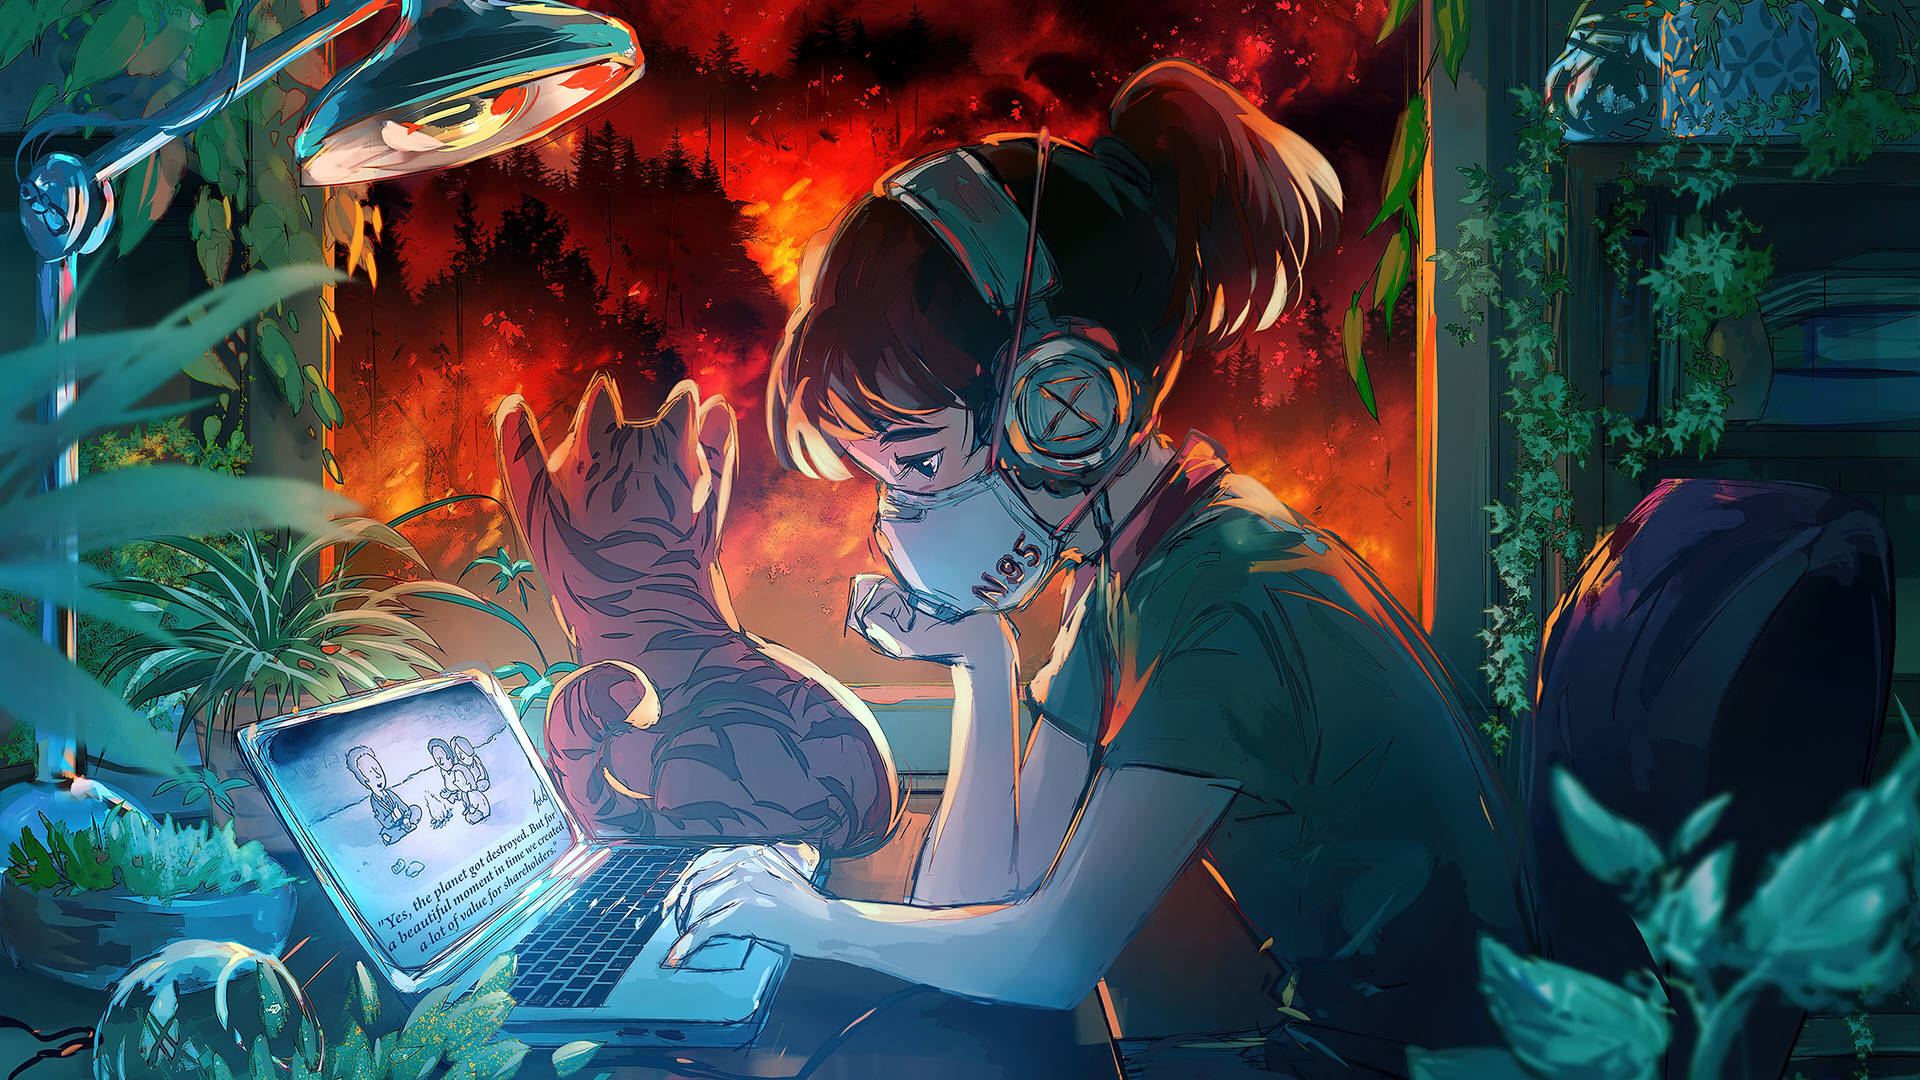 Masked Anime Girl Works On Laptop With Her Cat